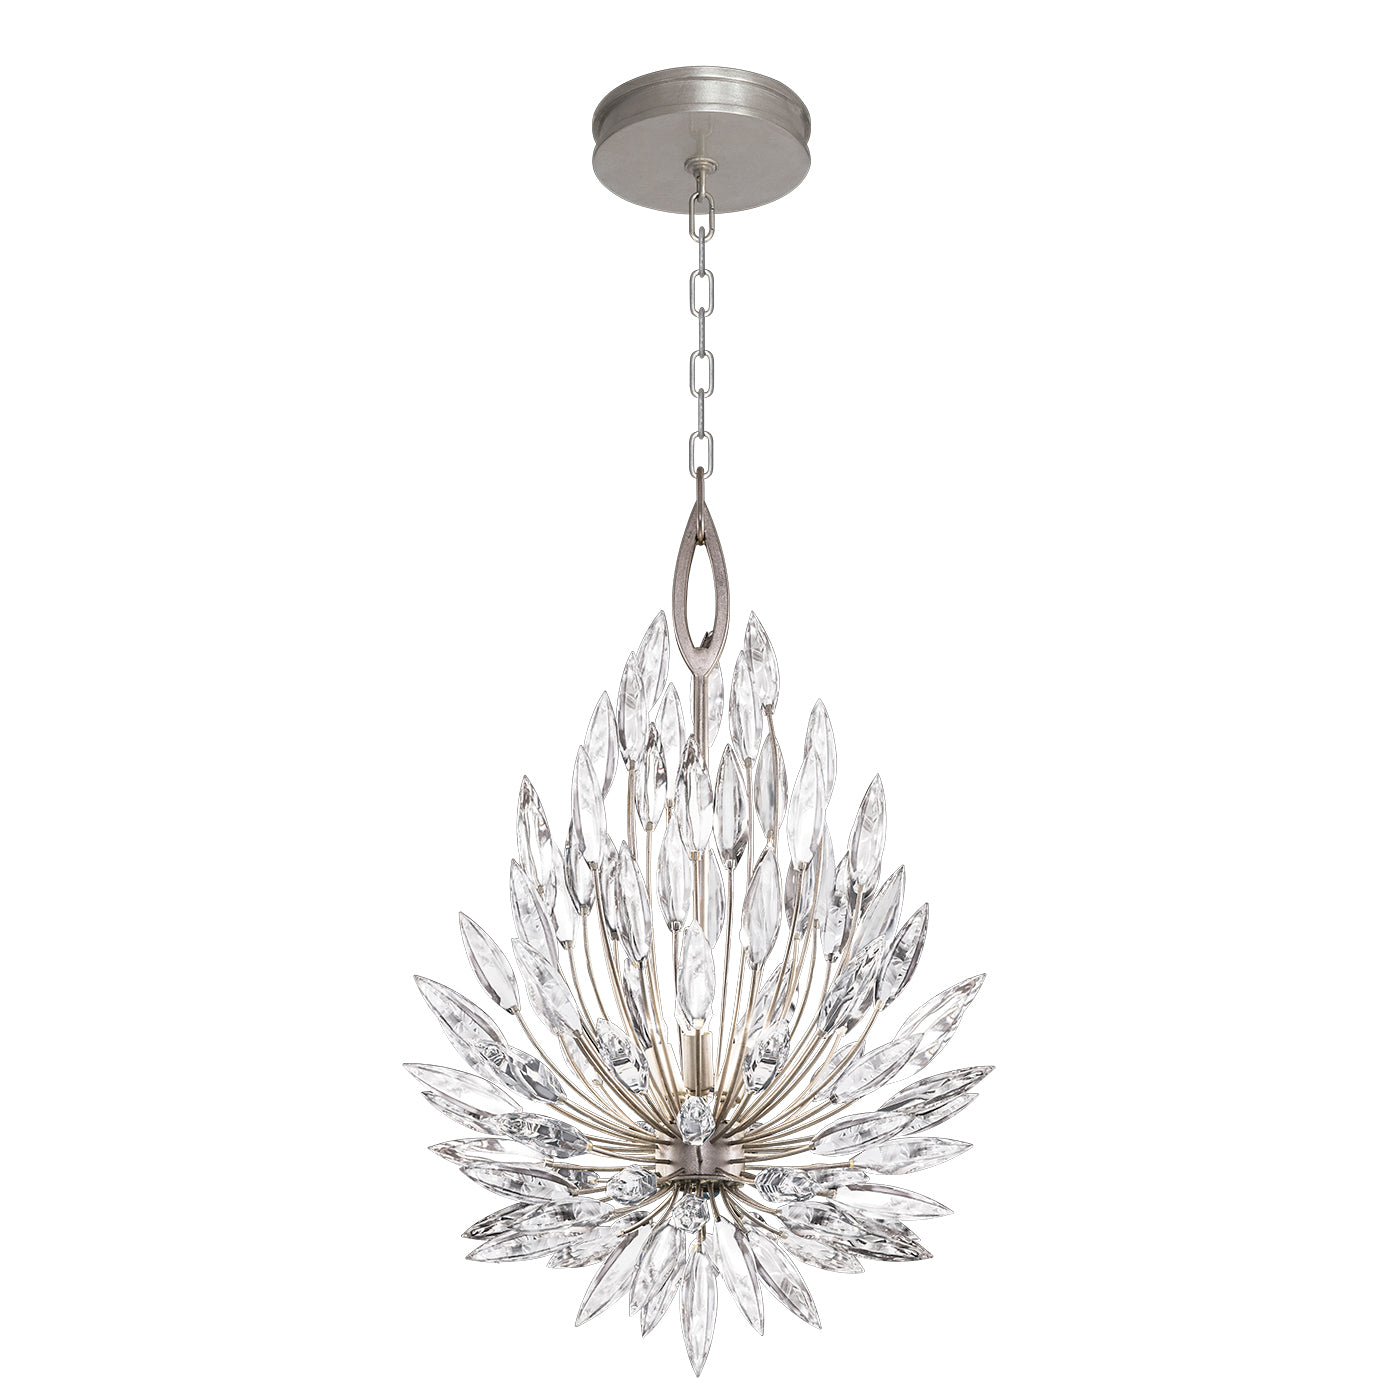 Fine Art Handcrafted Lighting Lily Buds Pendant Chandeliers Fine Art Handcrafted Lighting Silver 19 x 32.5 